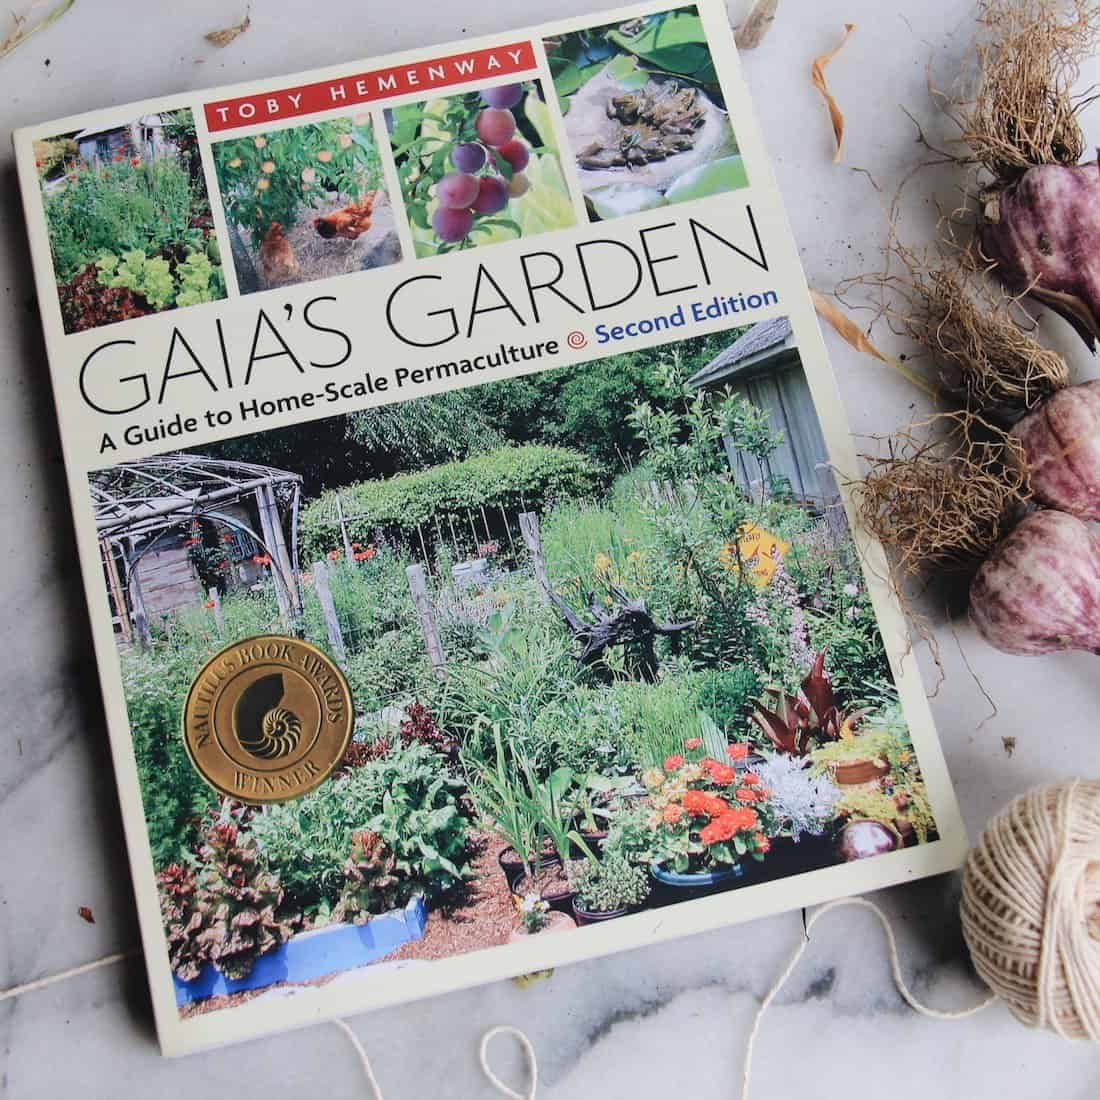 Gaia's Garden Book | List of Gardening Books - The Best Ones! | from Home for the Harvest | www.homefortheharvest.com